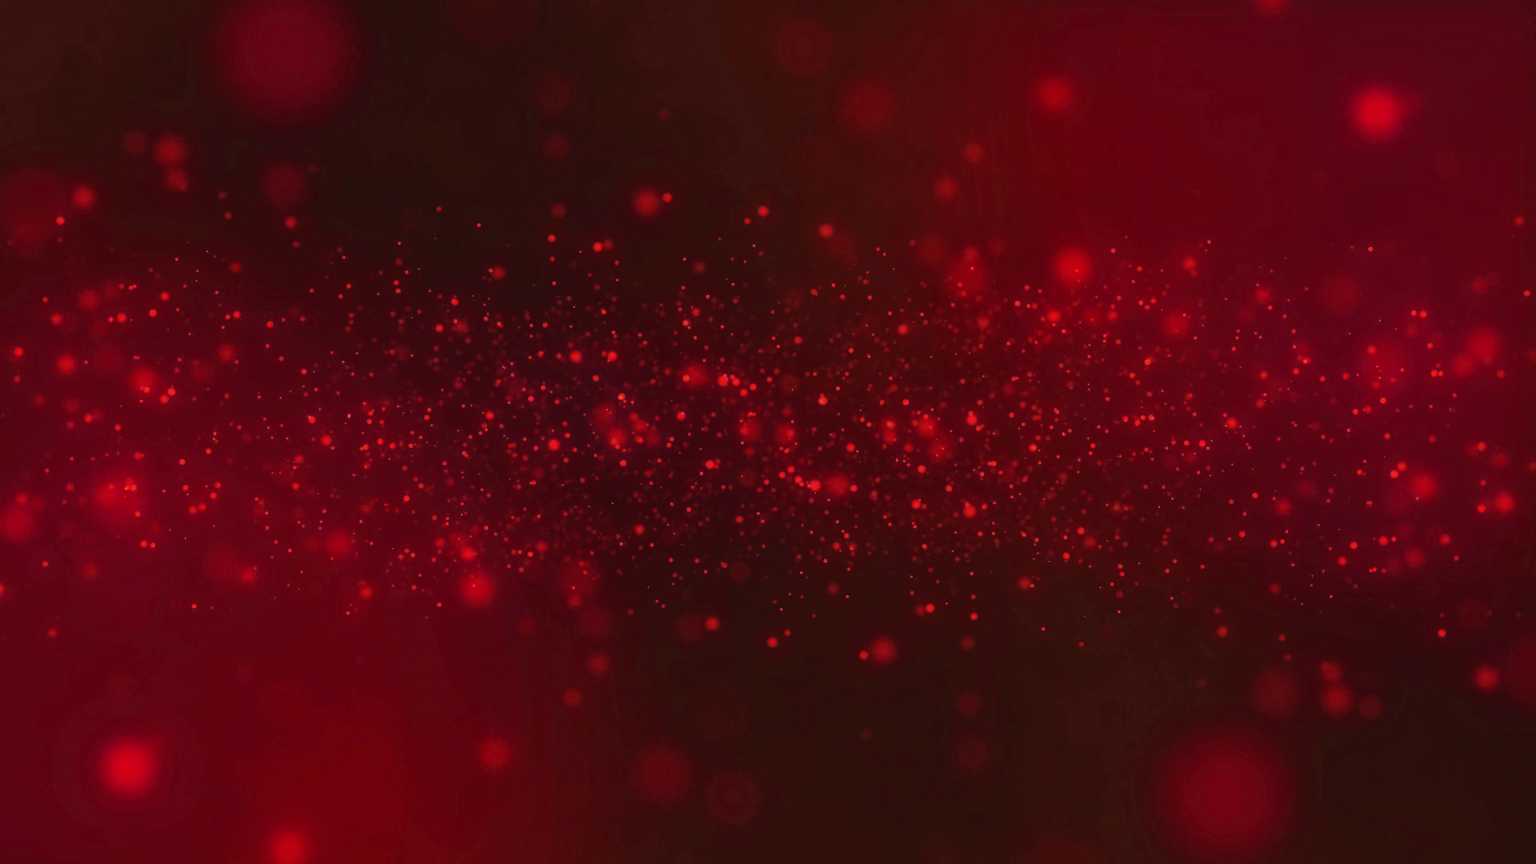 4K Red Particles Motion Background || Free To Use Screensaver || FREE DOWNLOAD